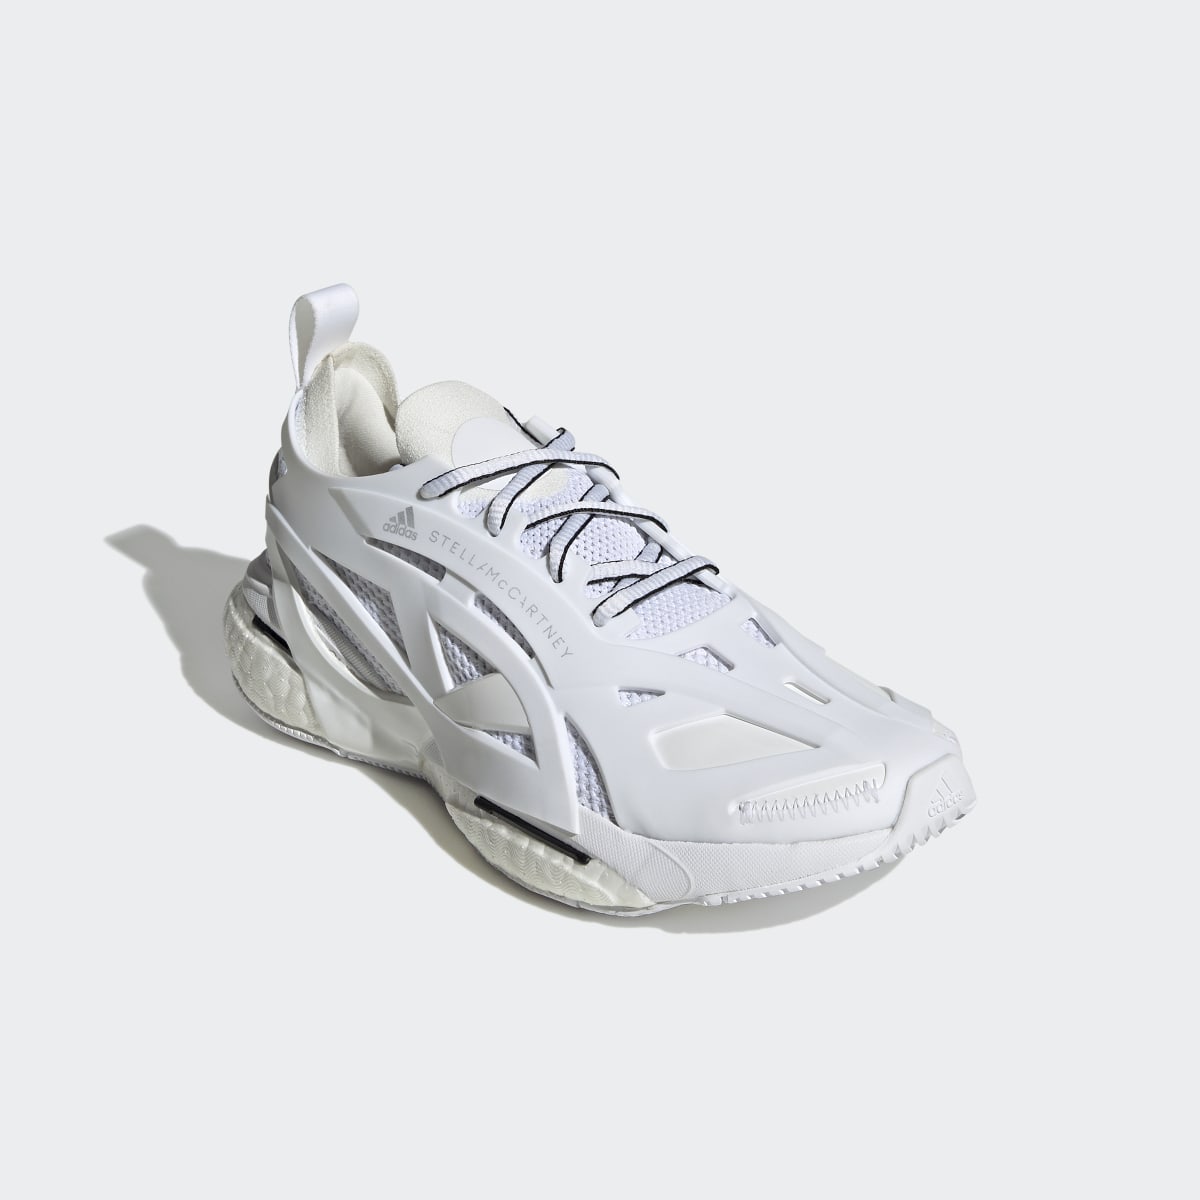 Adidas by Stella McCartney Solarglide Shoes. 5